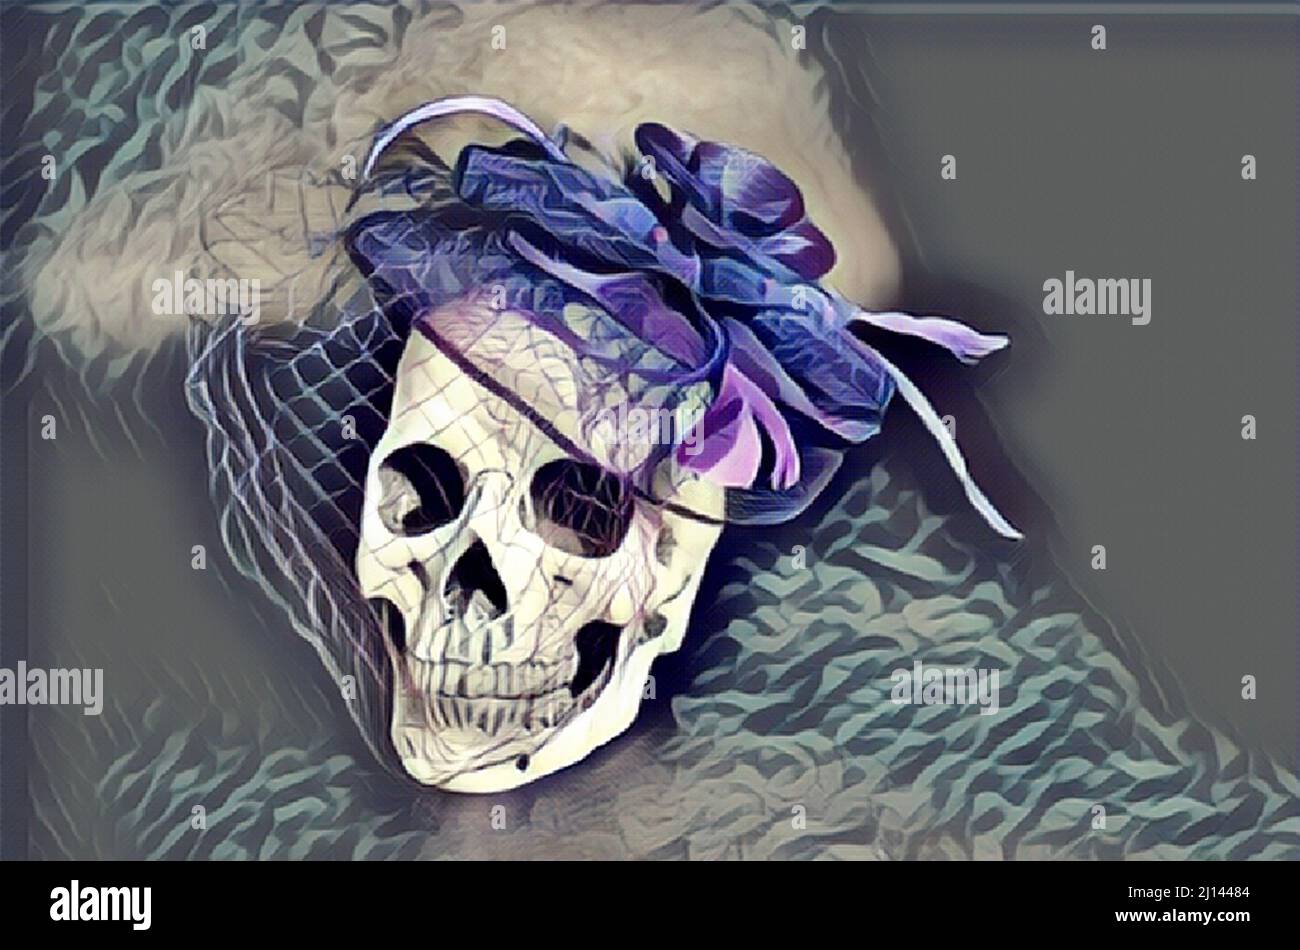 Model human skull with vintage hat and veil edited to look like a painting. Stock Photo